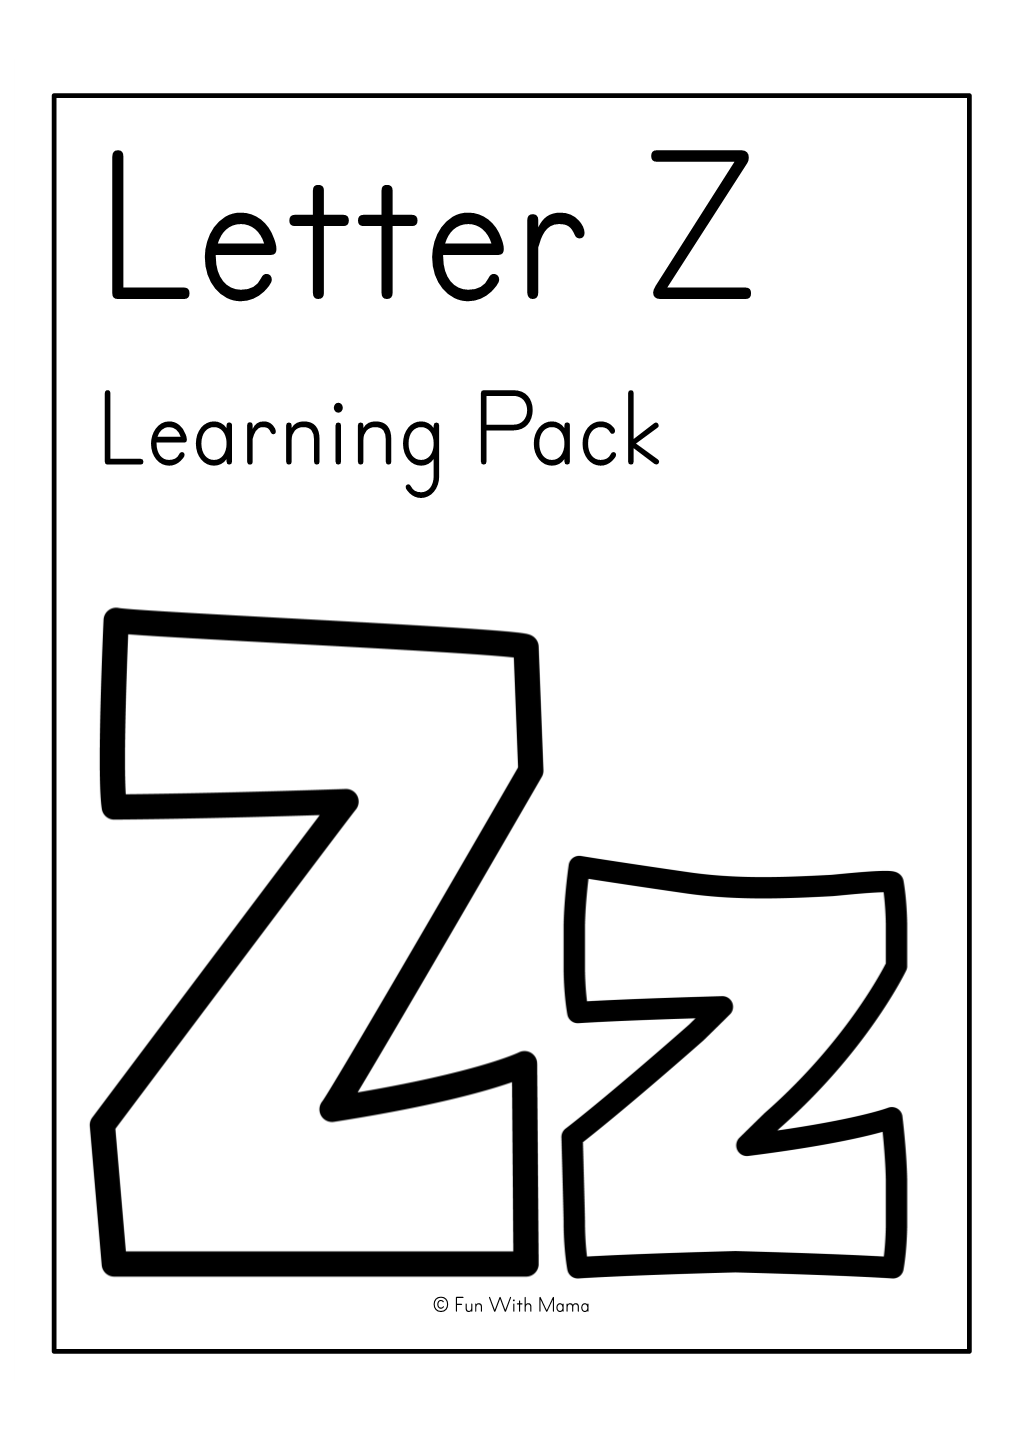 Learning Pack